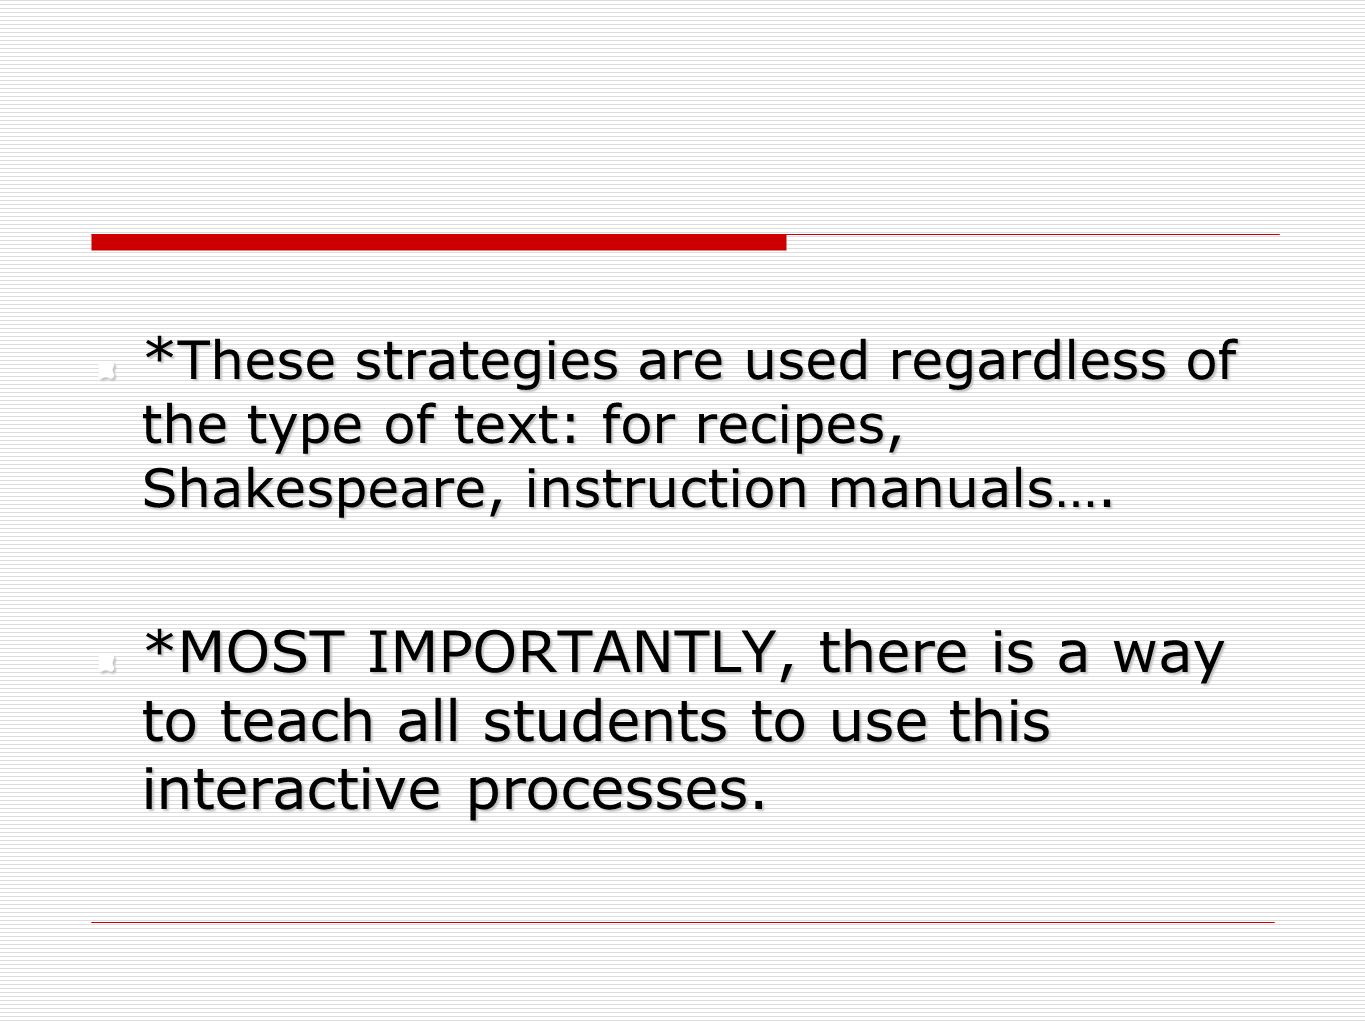 *These strategies are used regardless of the type of text: for recipes, Shakespeare, instruction manuals….